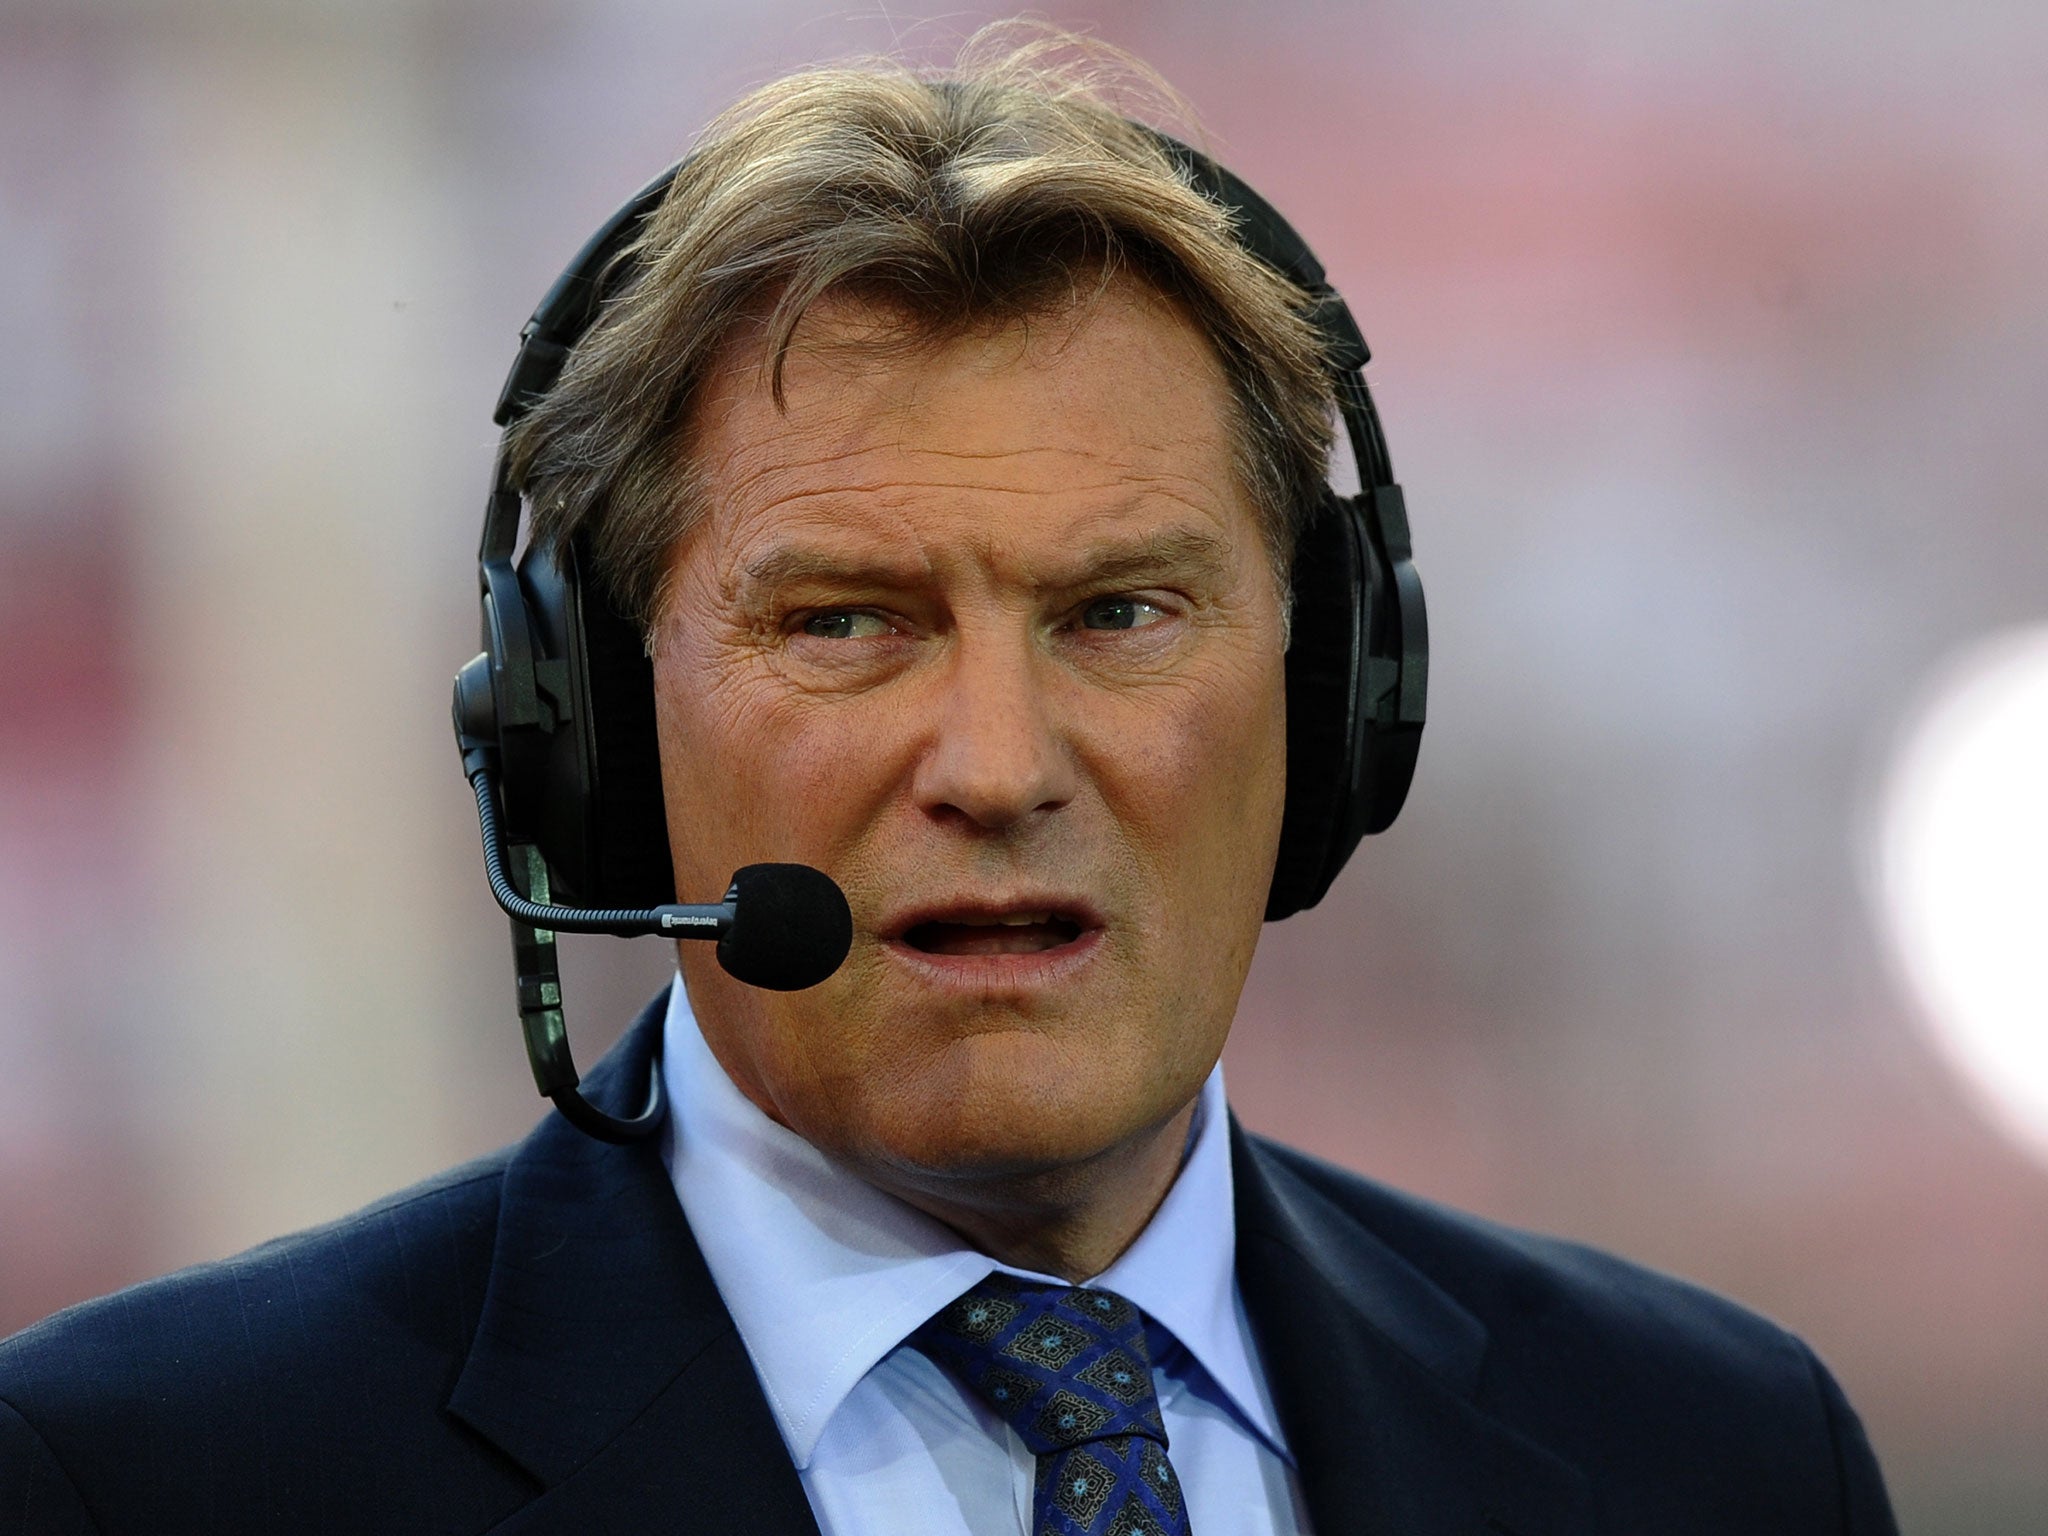 Hoddle previously managed England between 1996 and 1999